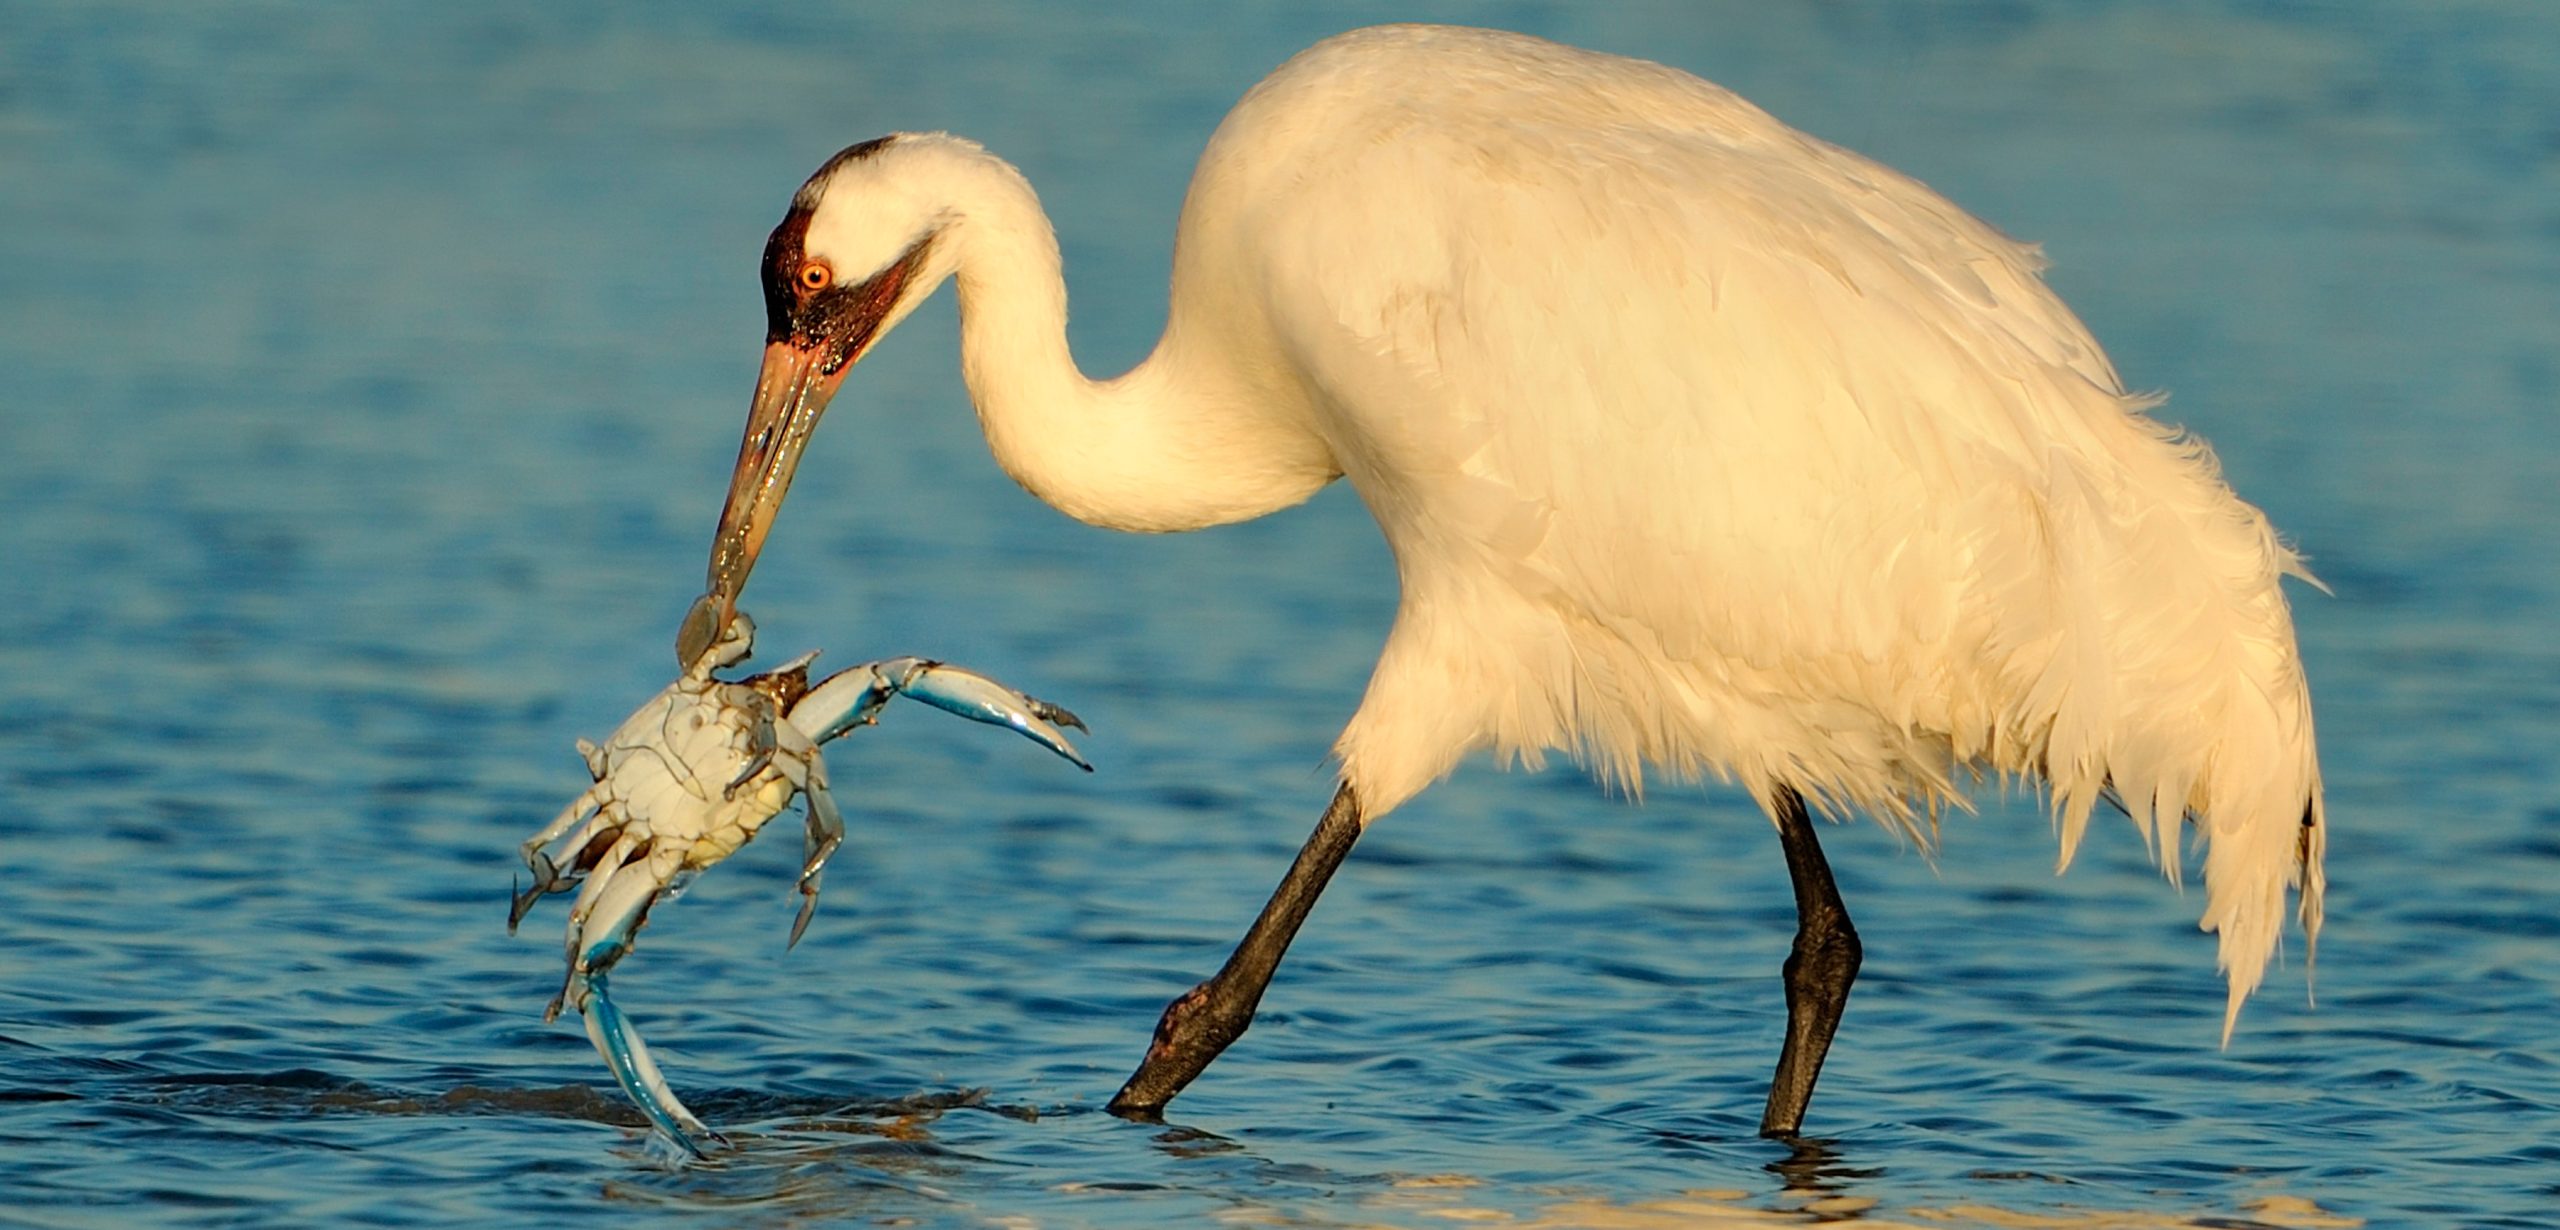 A member of the only remaining wild flock of whooping cranes plucks a crab from the shallows off Texas. Photo by Alan Murphy/BIA/Minden Pictures/Corbis